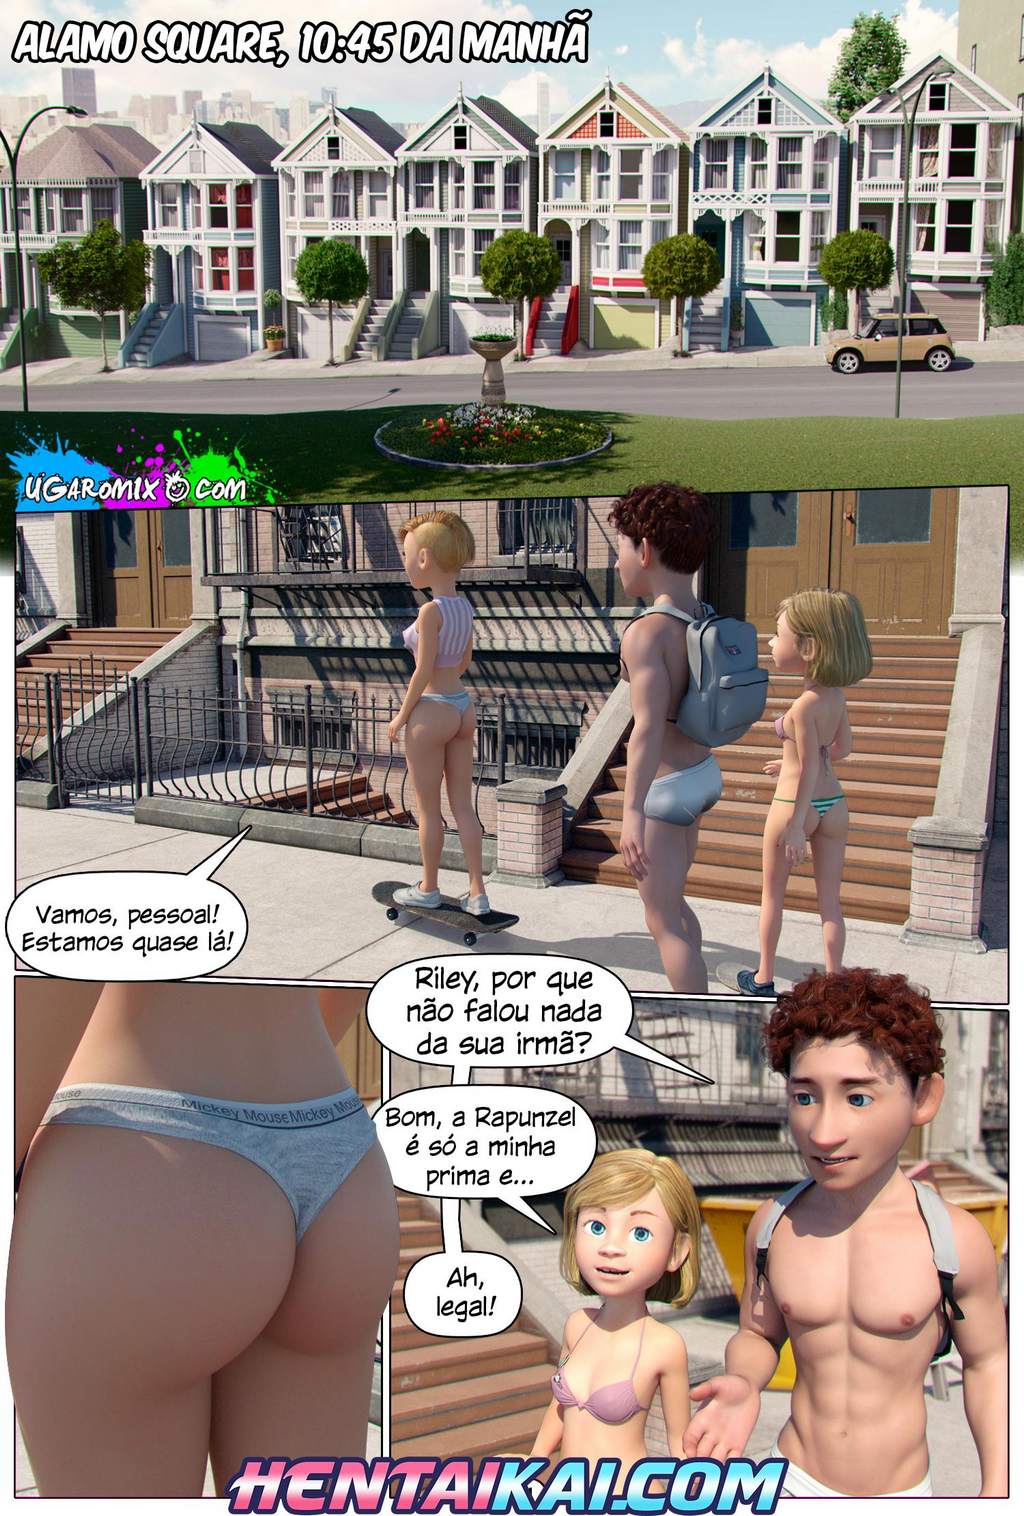 Inside-Riley-6-In-The-Park-With-Rapunzel-Ugaromix-Novinha-The-Hentai-02